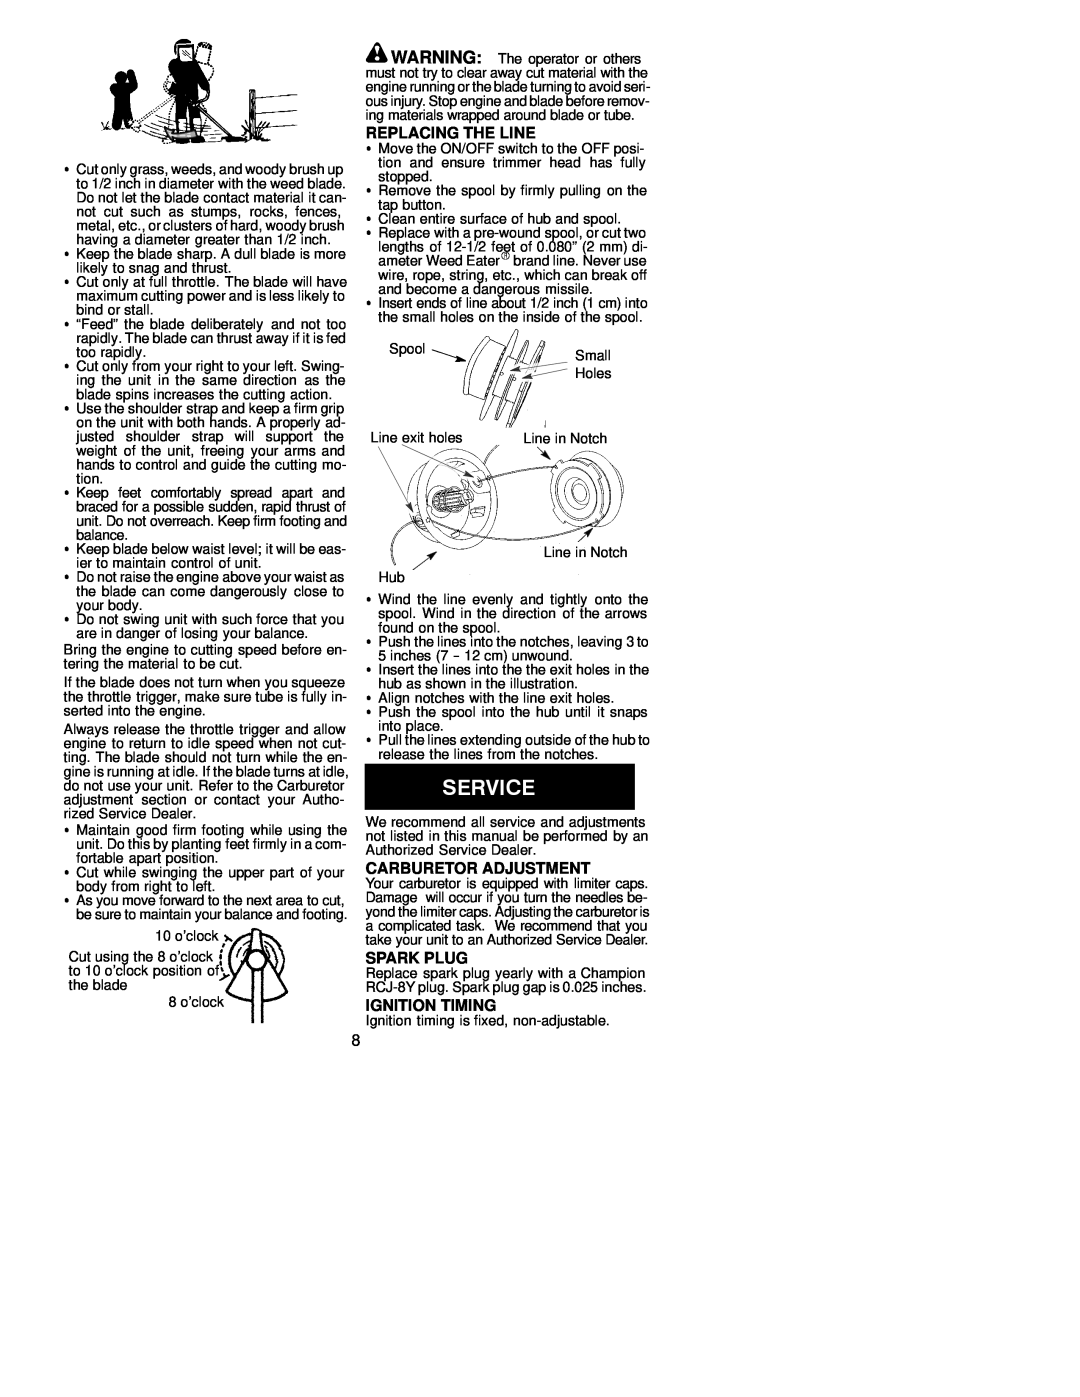 Weed Eater 530088848 operating instructions Replacing The Line, Carburetor Adjustment, Spark Plug, Ignition Timing 